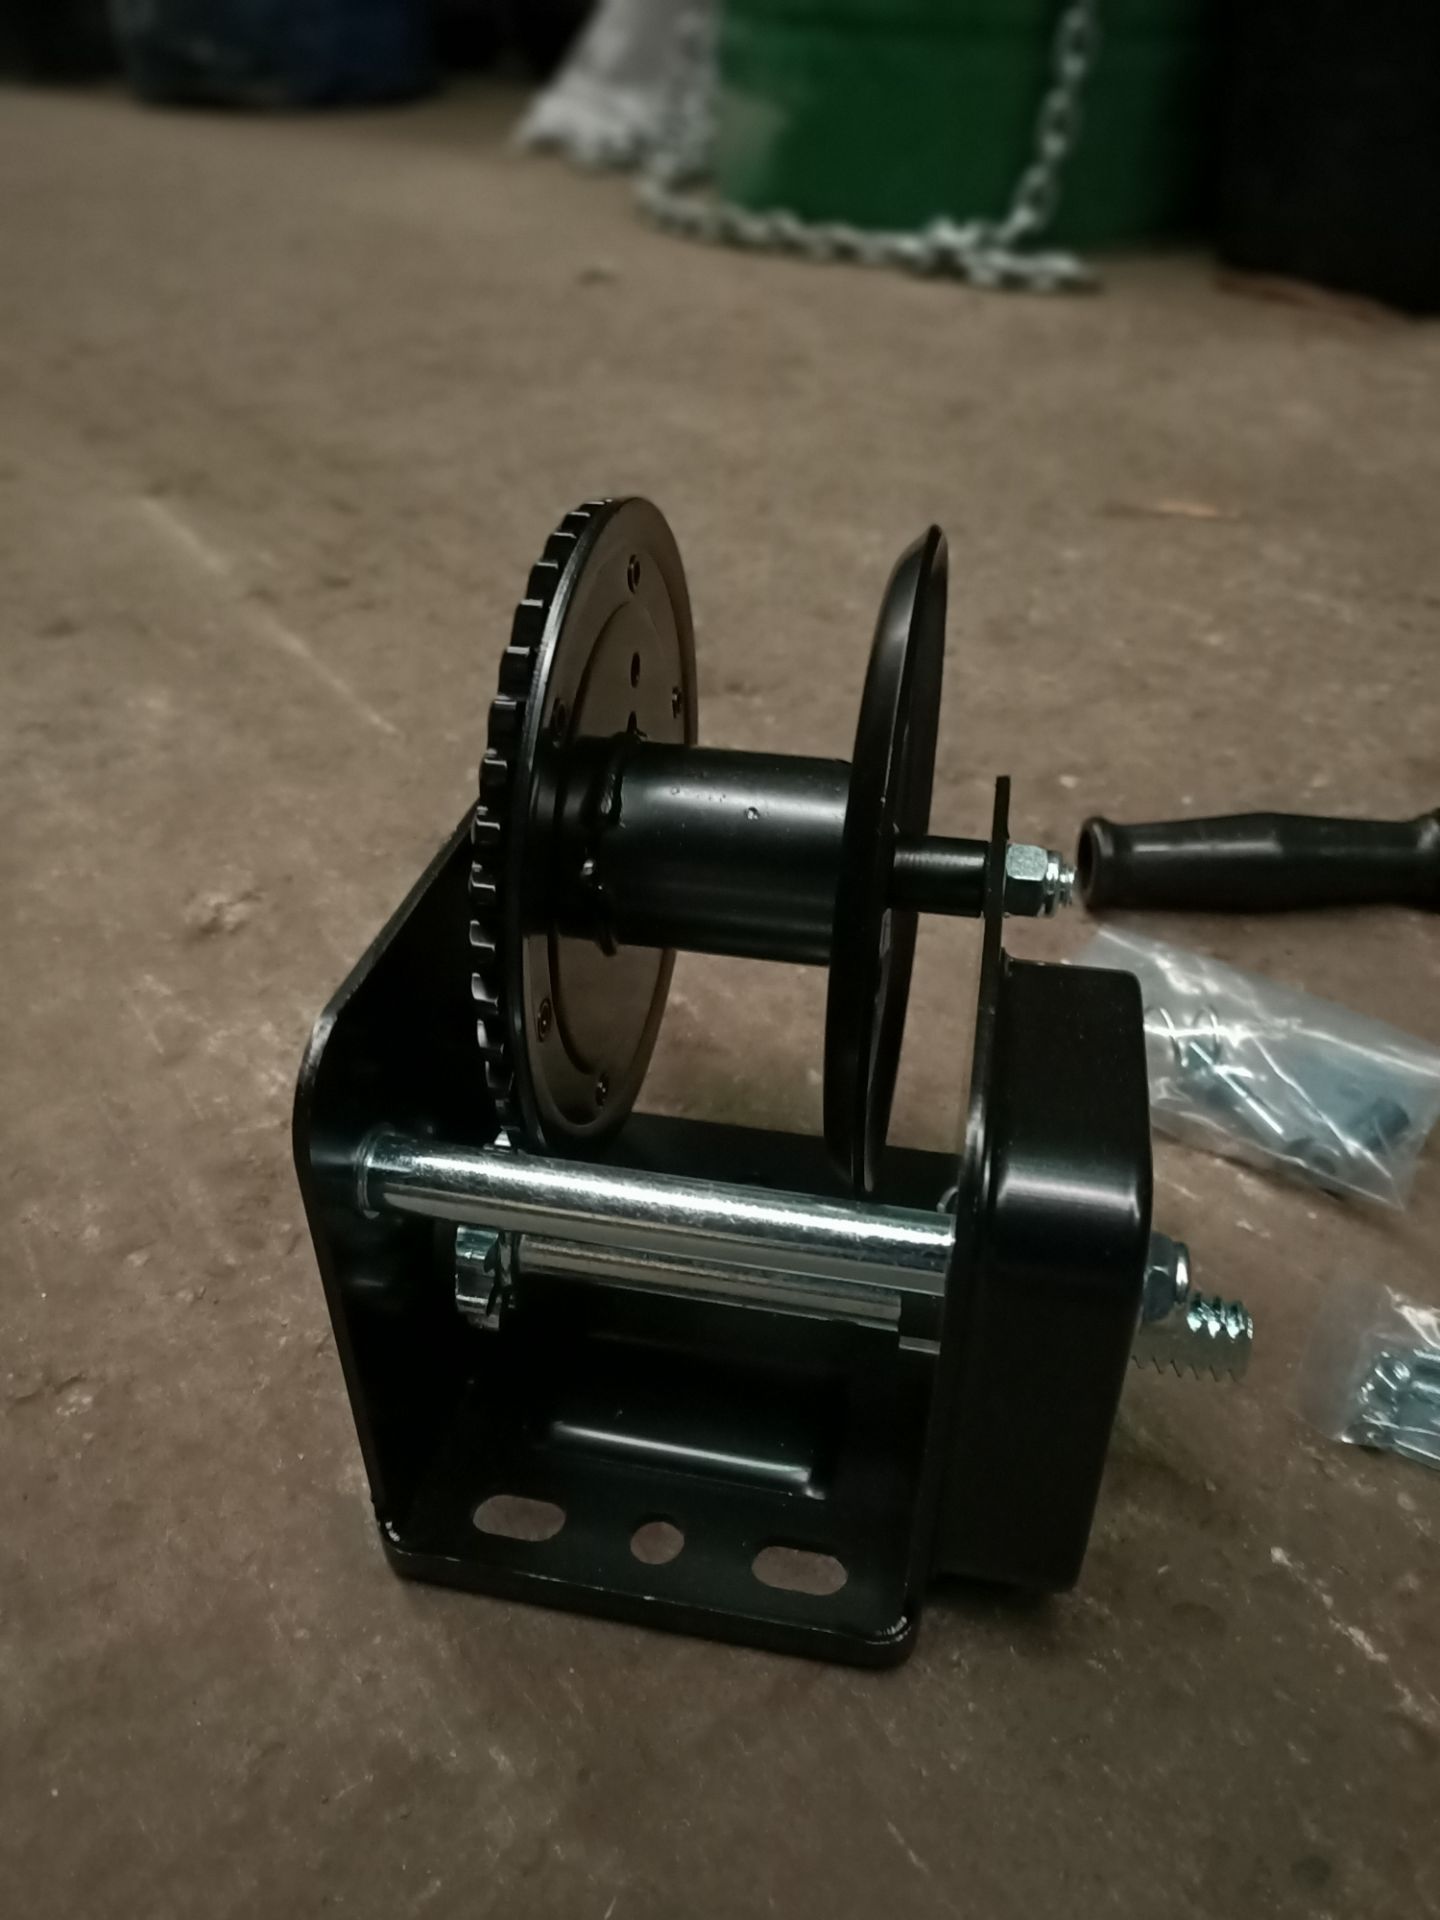 2000LBS BLACK HAND WINCH WITH BRAKE (NOT FOR LIFTING) - Image 2 of 3